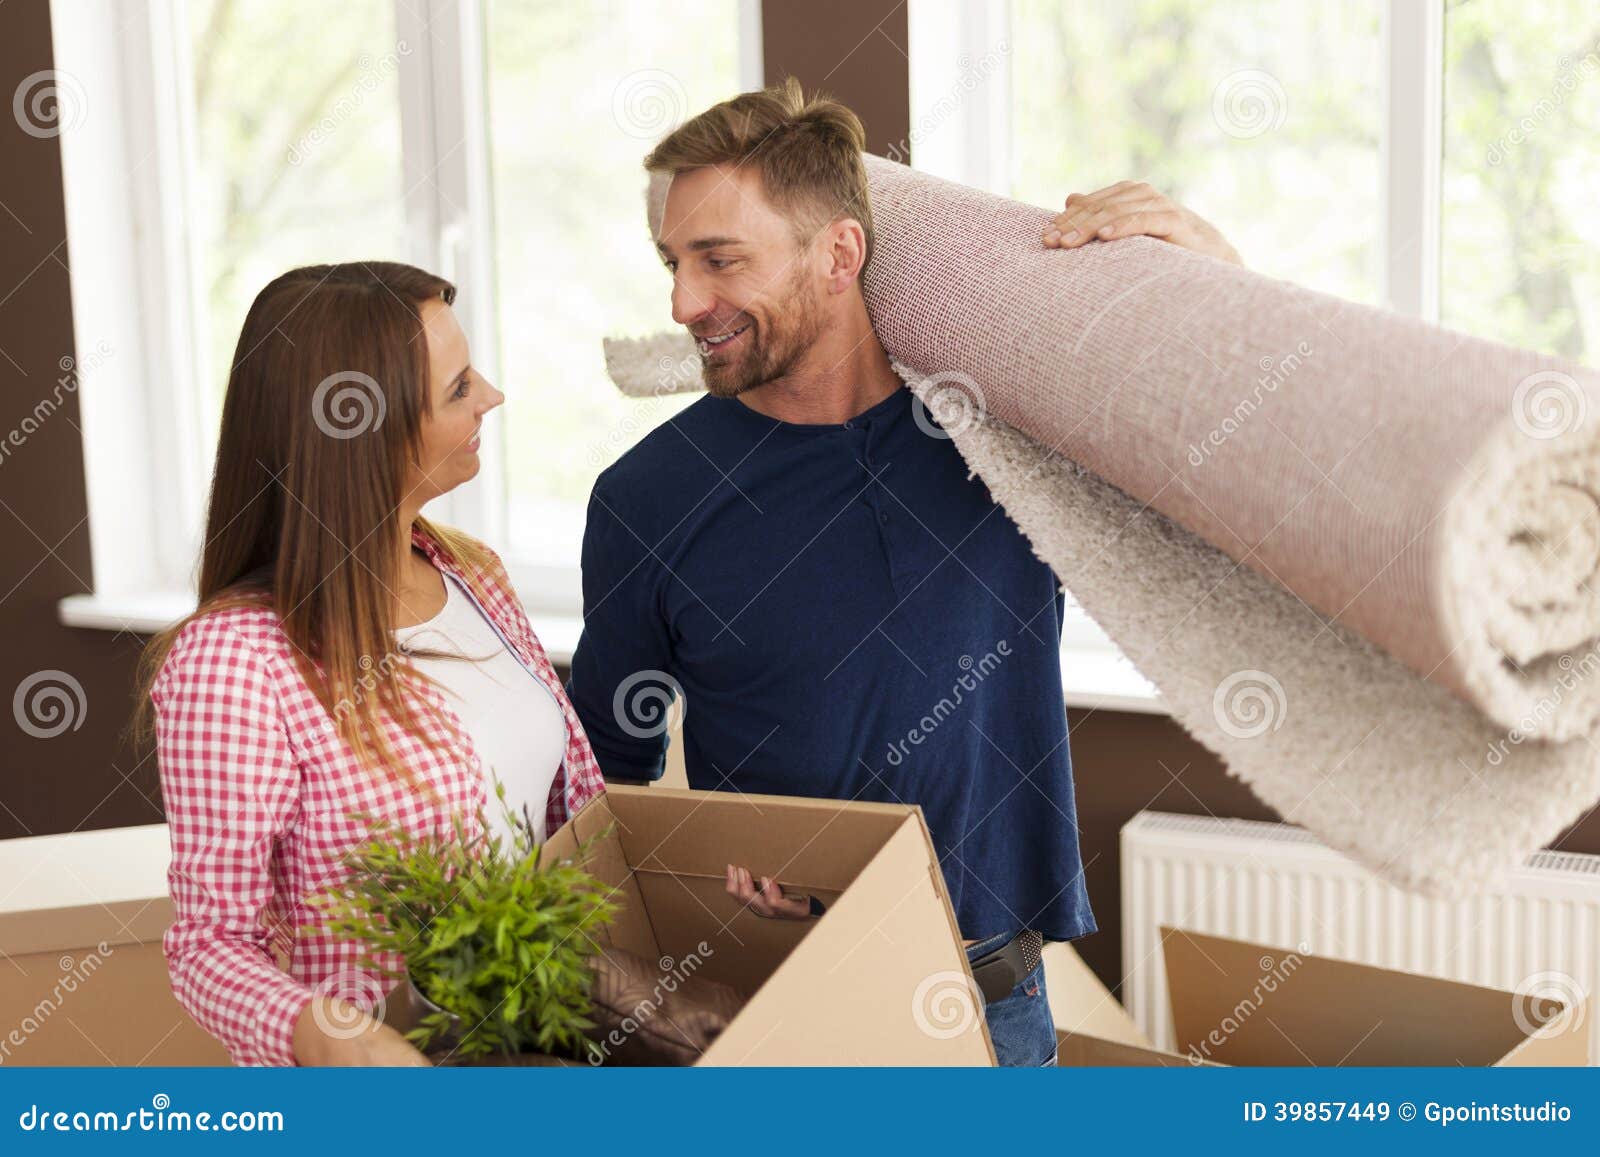 Lovely Couple In New Home Stock Image Image Of Enjoyment 39857449